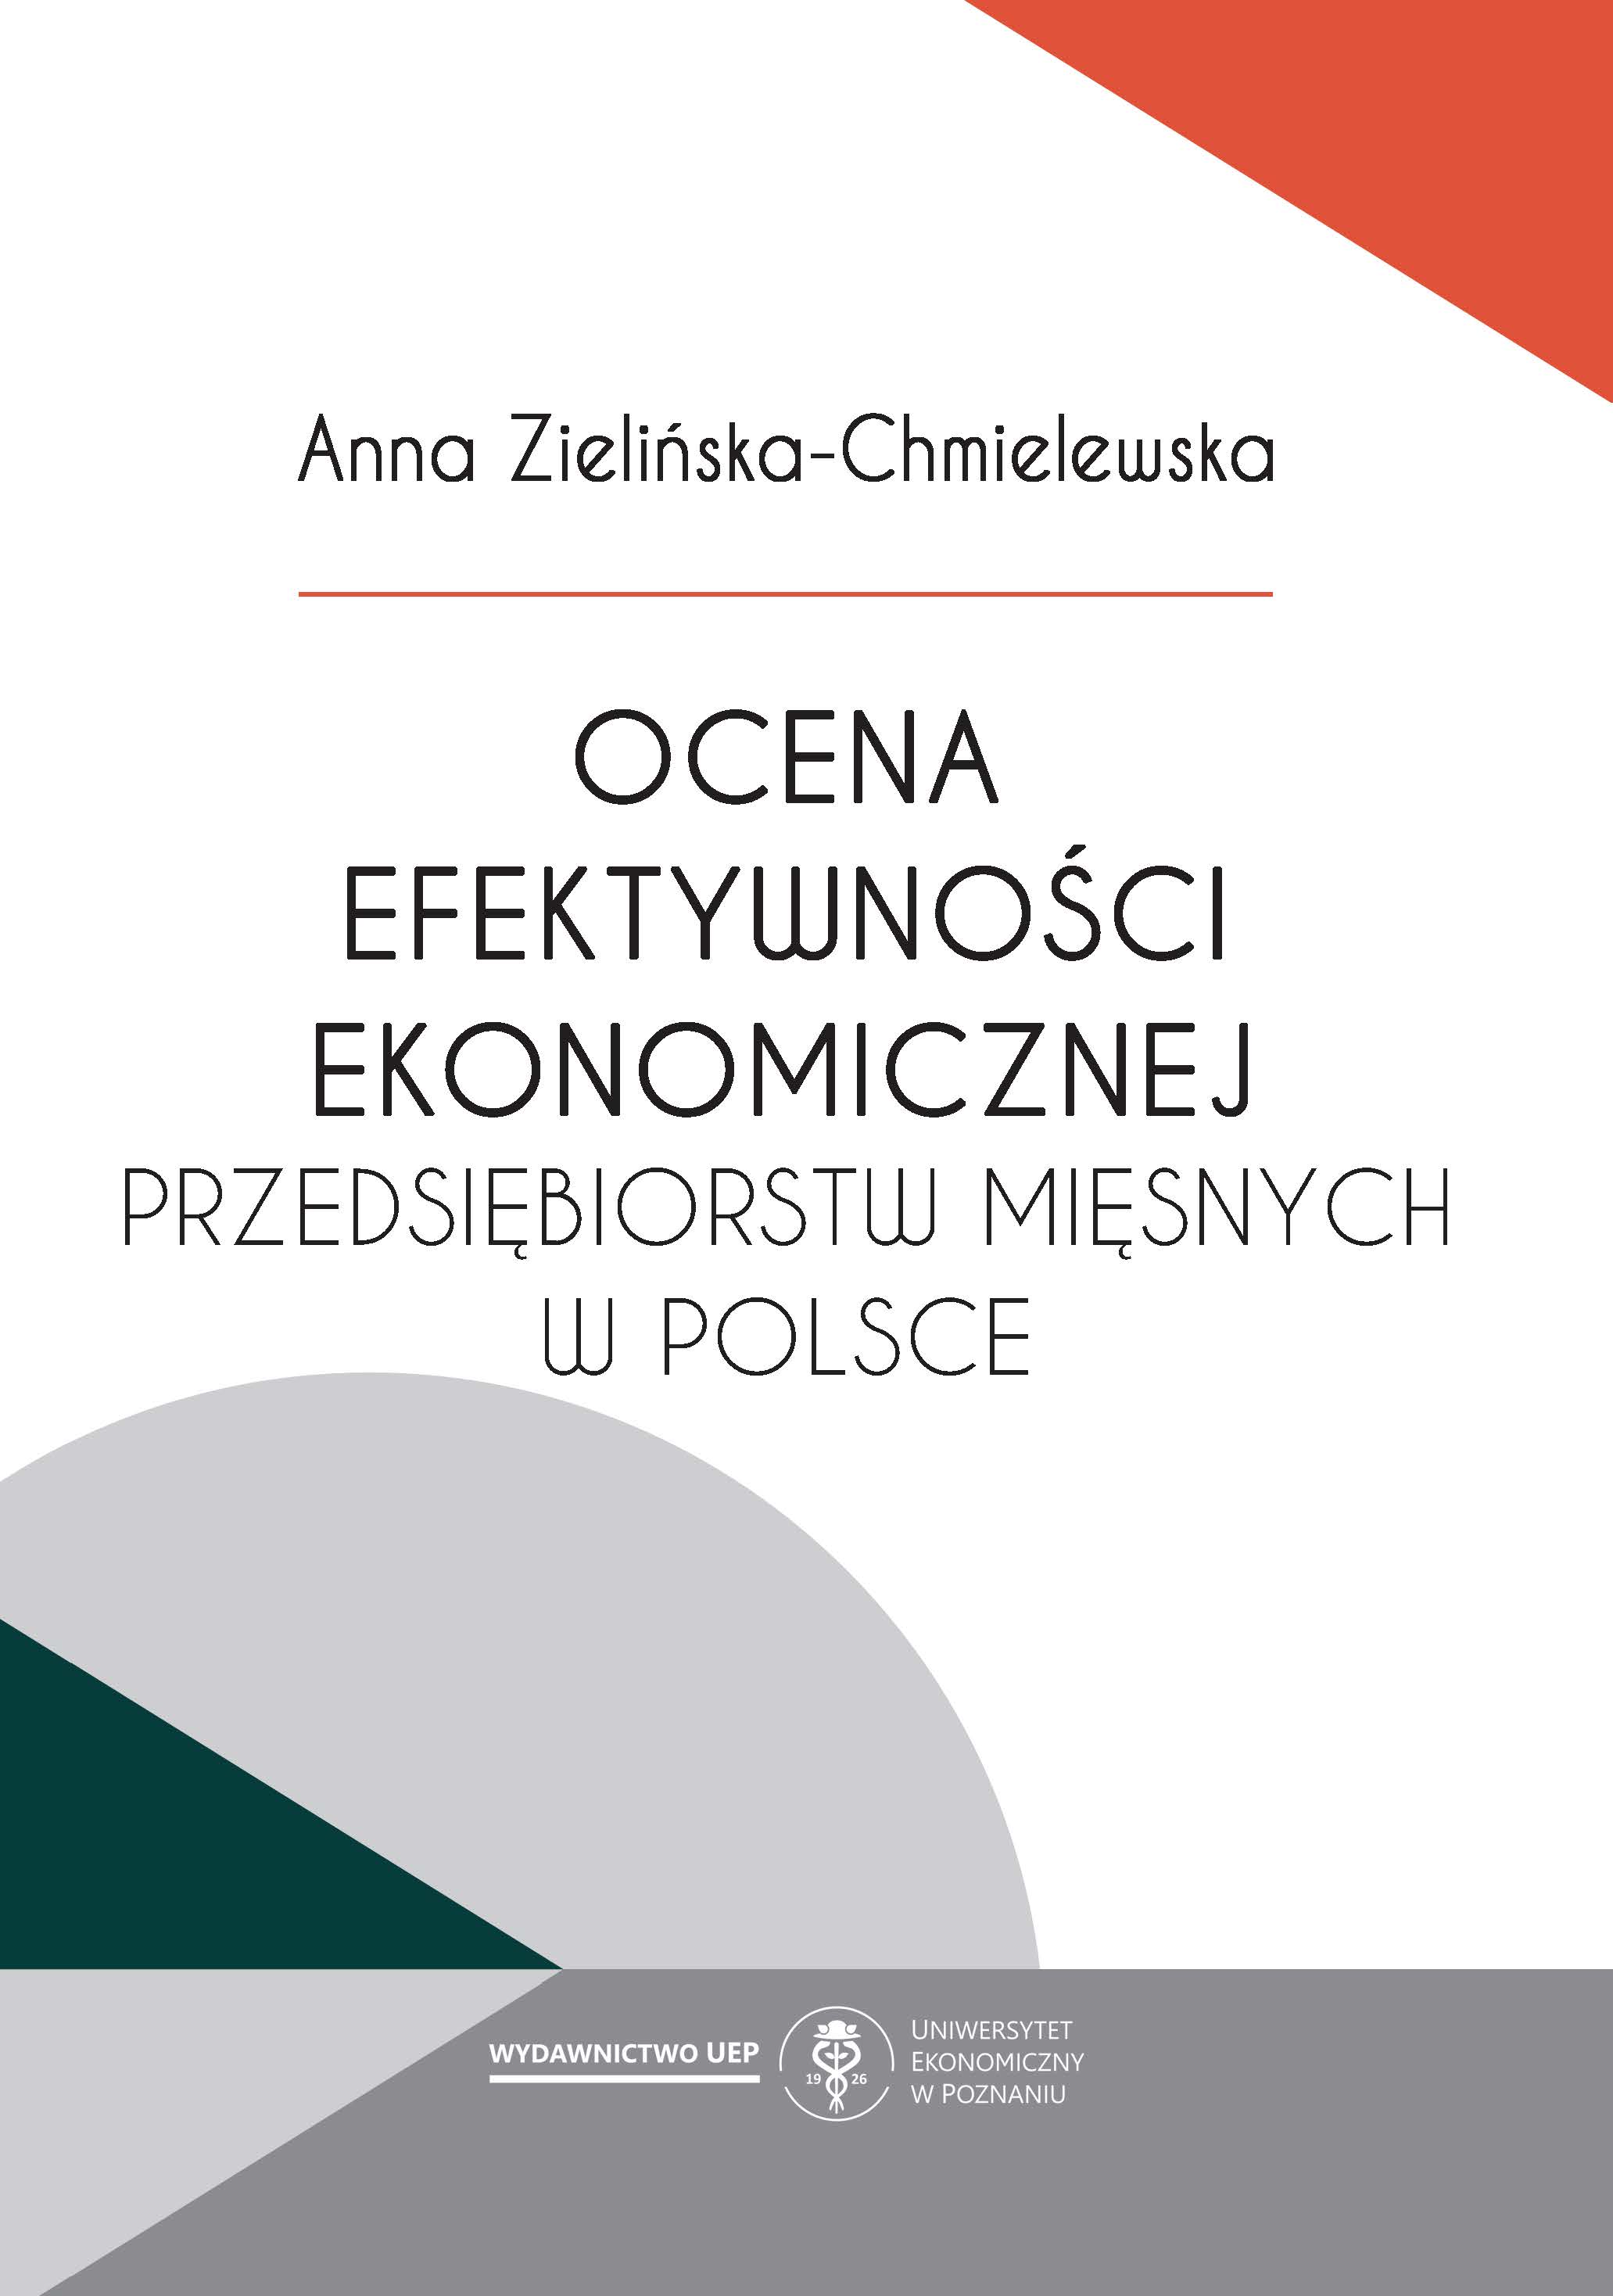 Evaluation of economic efficiency of meat processing enterprises in Poland